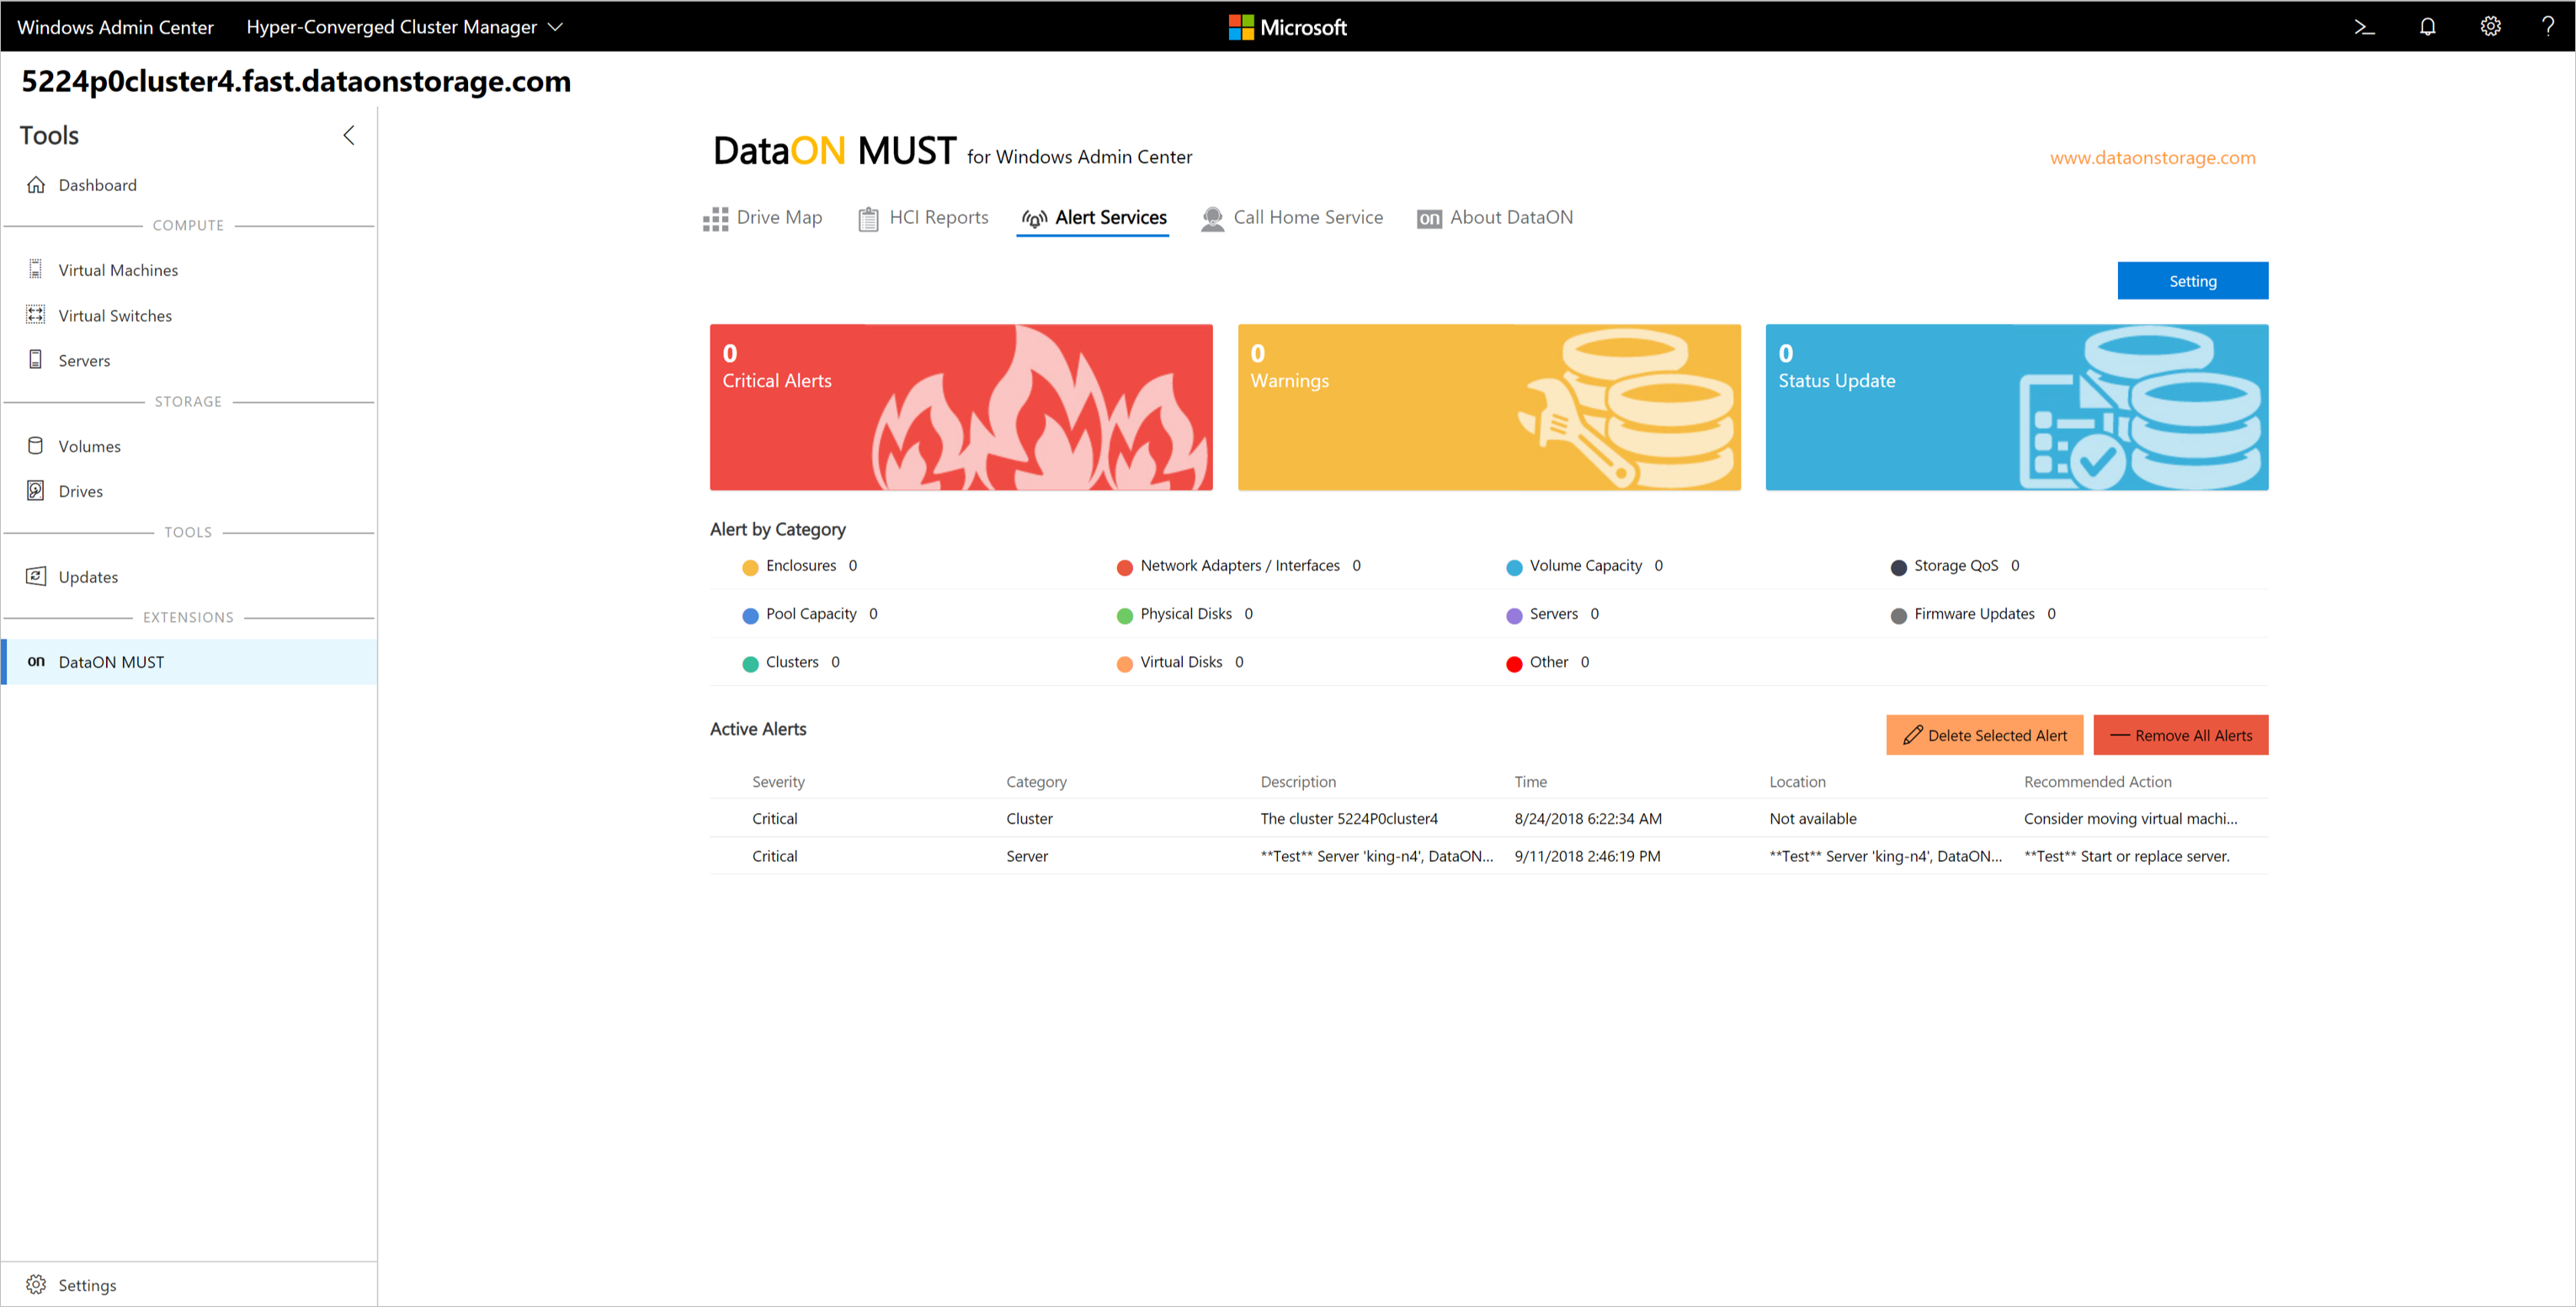 Screenshot of the Windows Admin Center showing the Alert Services in the DataON MUST extension.